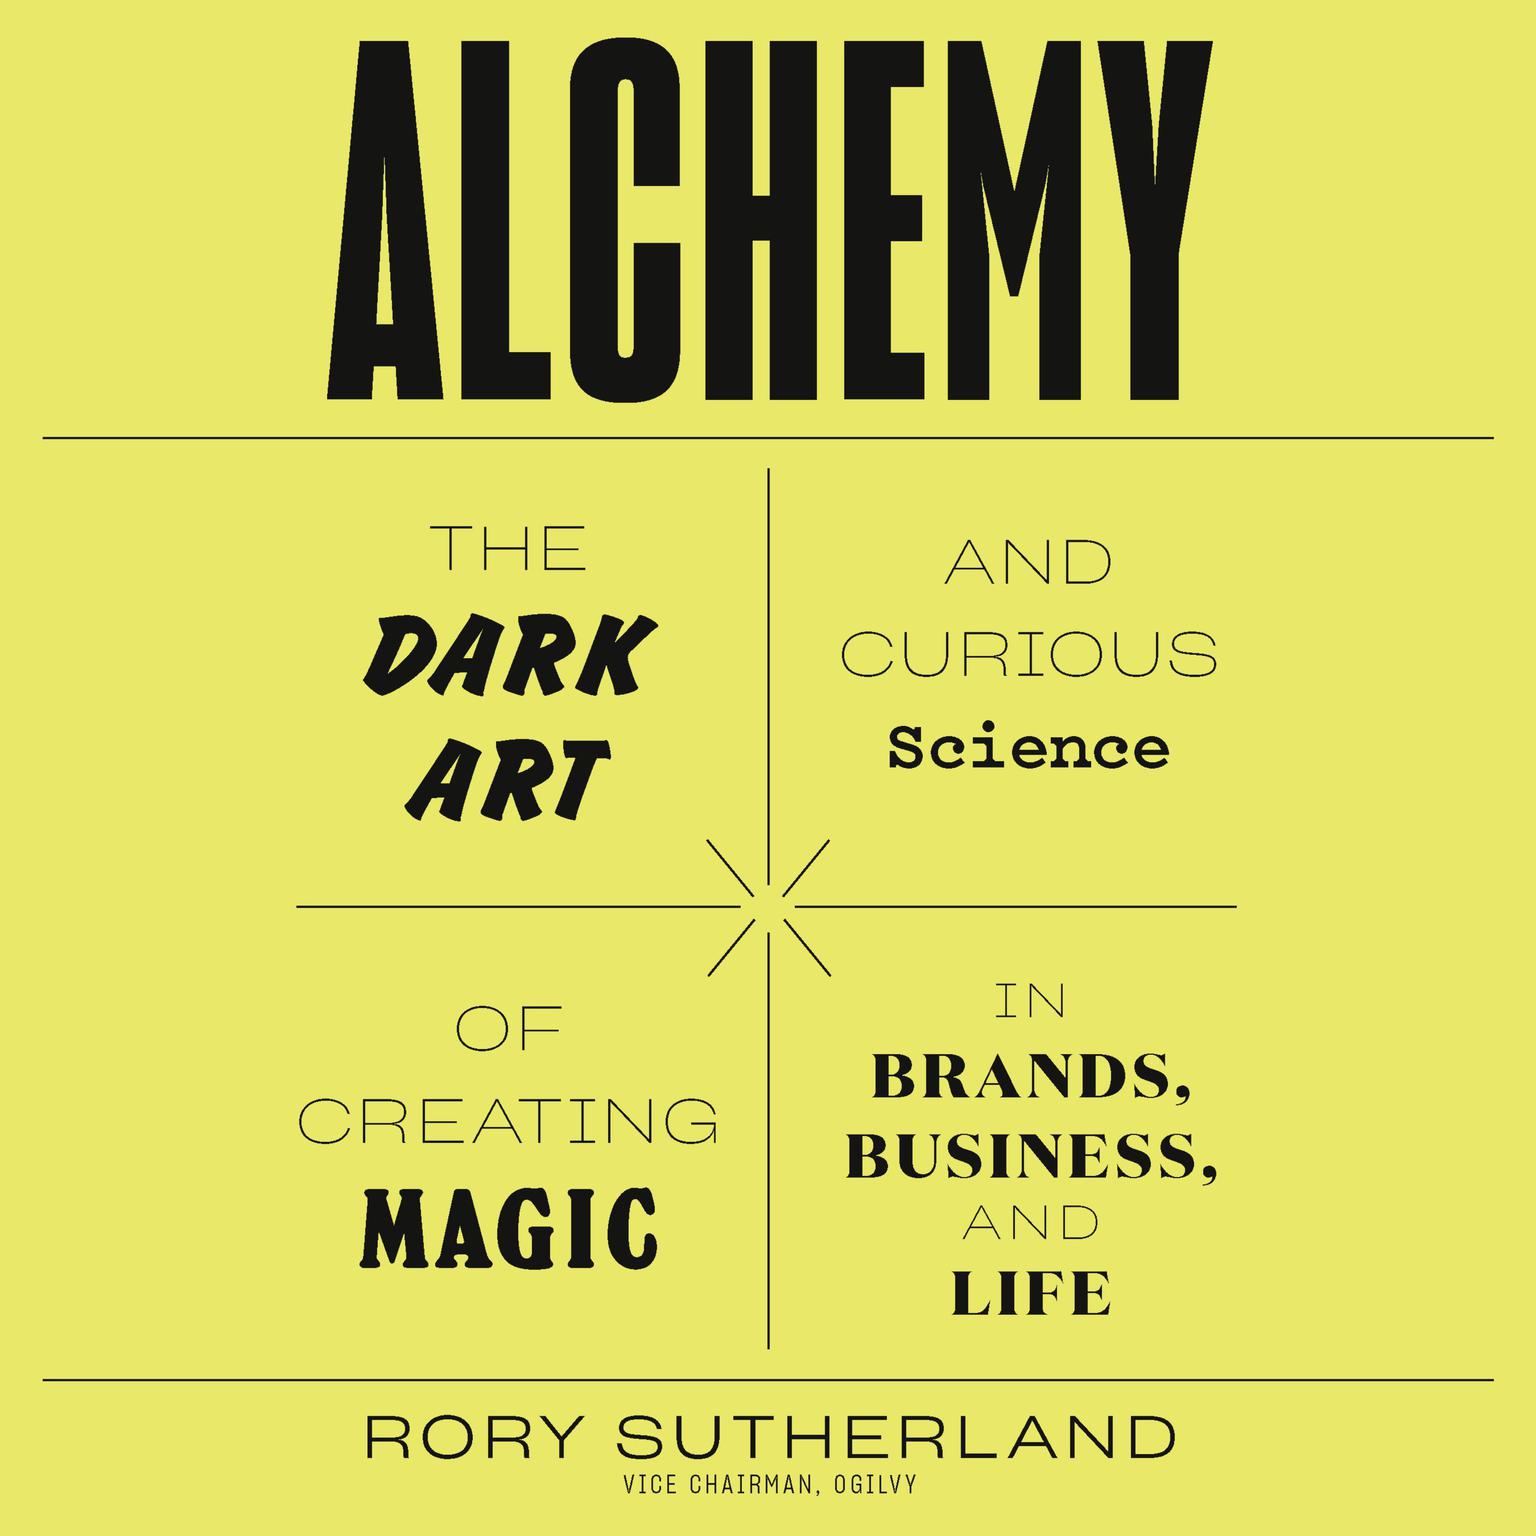 Alchemy: The Dark Art and Curious Science of Creating Magic in Brands, Business, and Life Audiobook, by Rory Sutherland